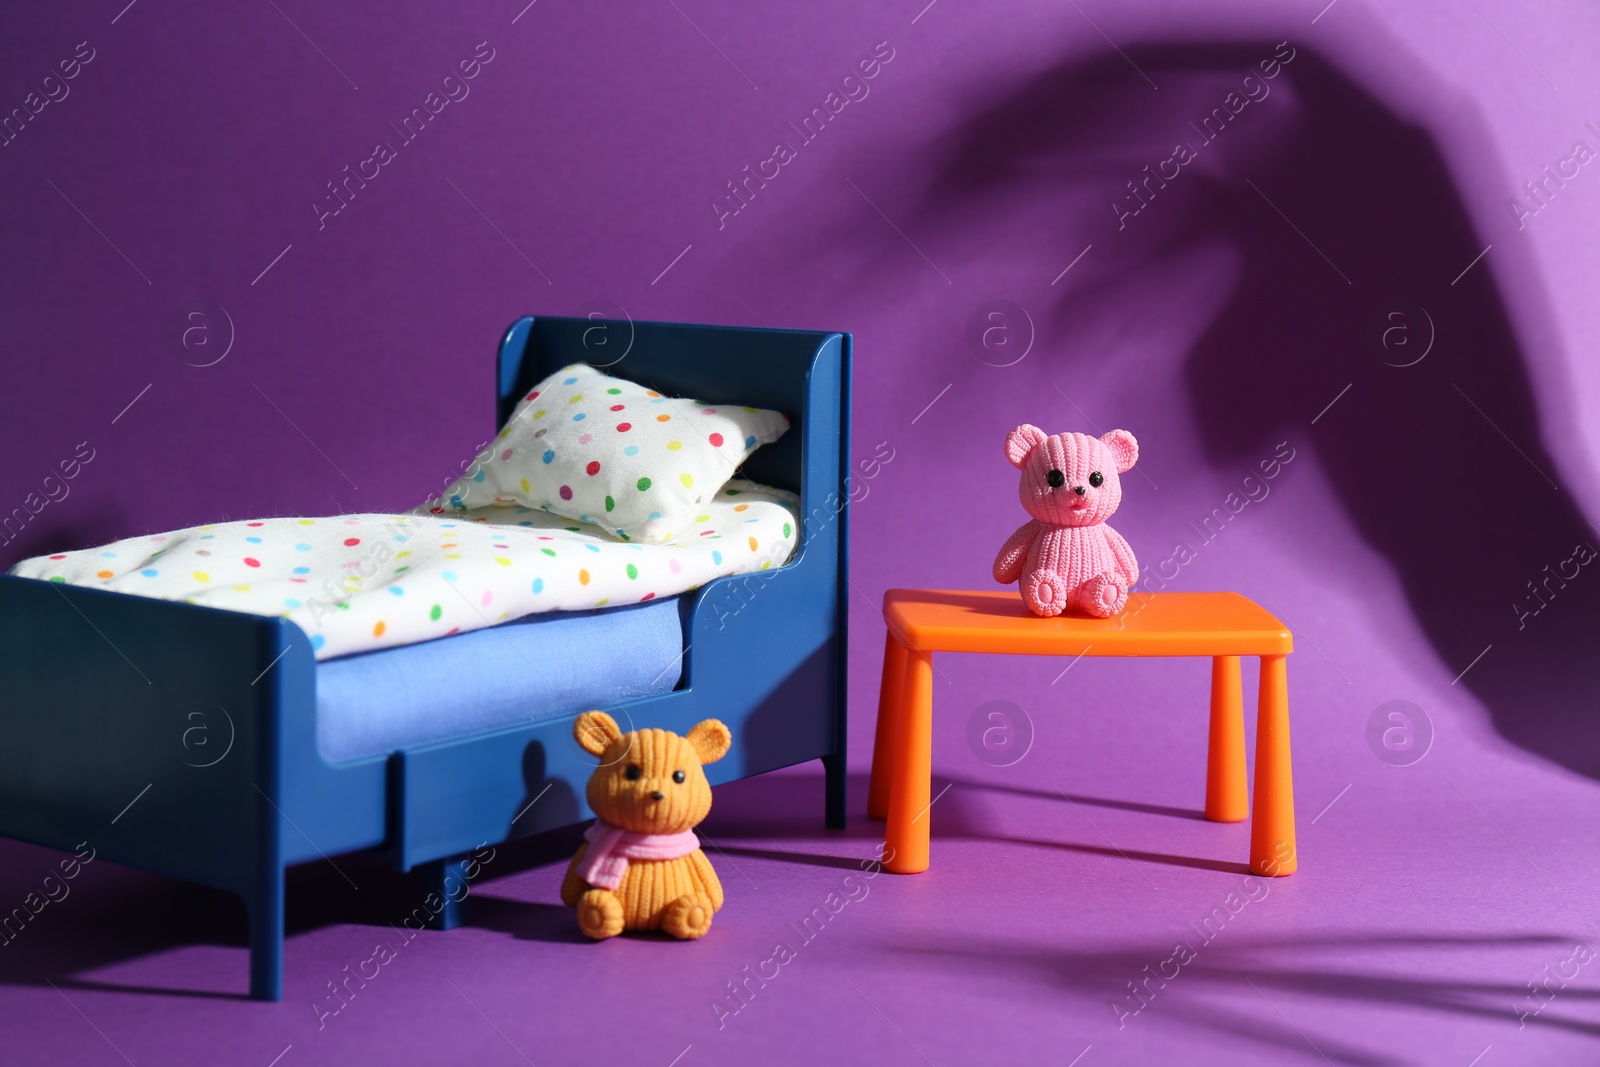 Photo of Stop child abuse. Little toy bears and scary shadow in kid's bedroom